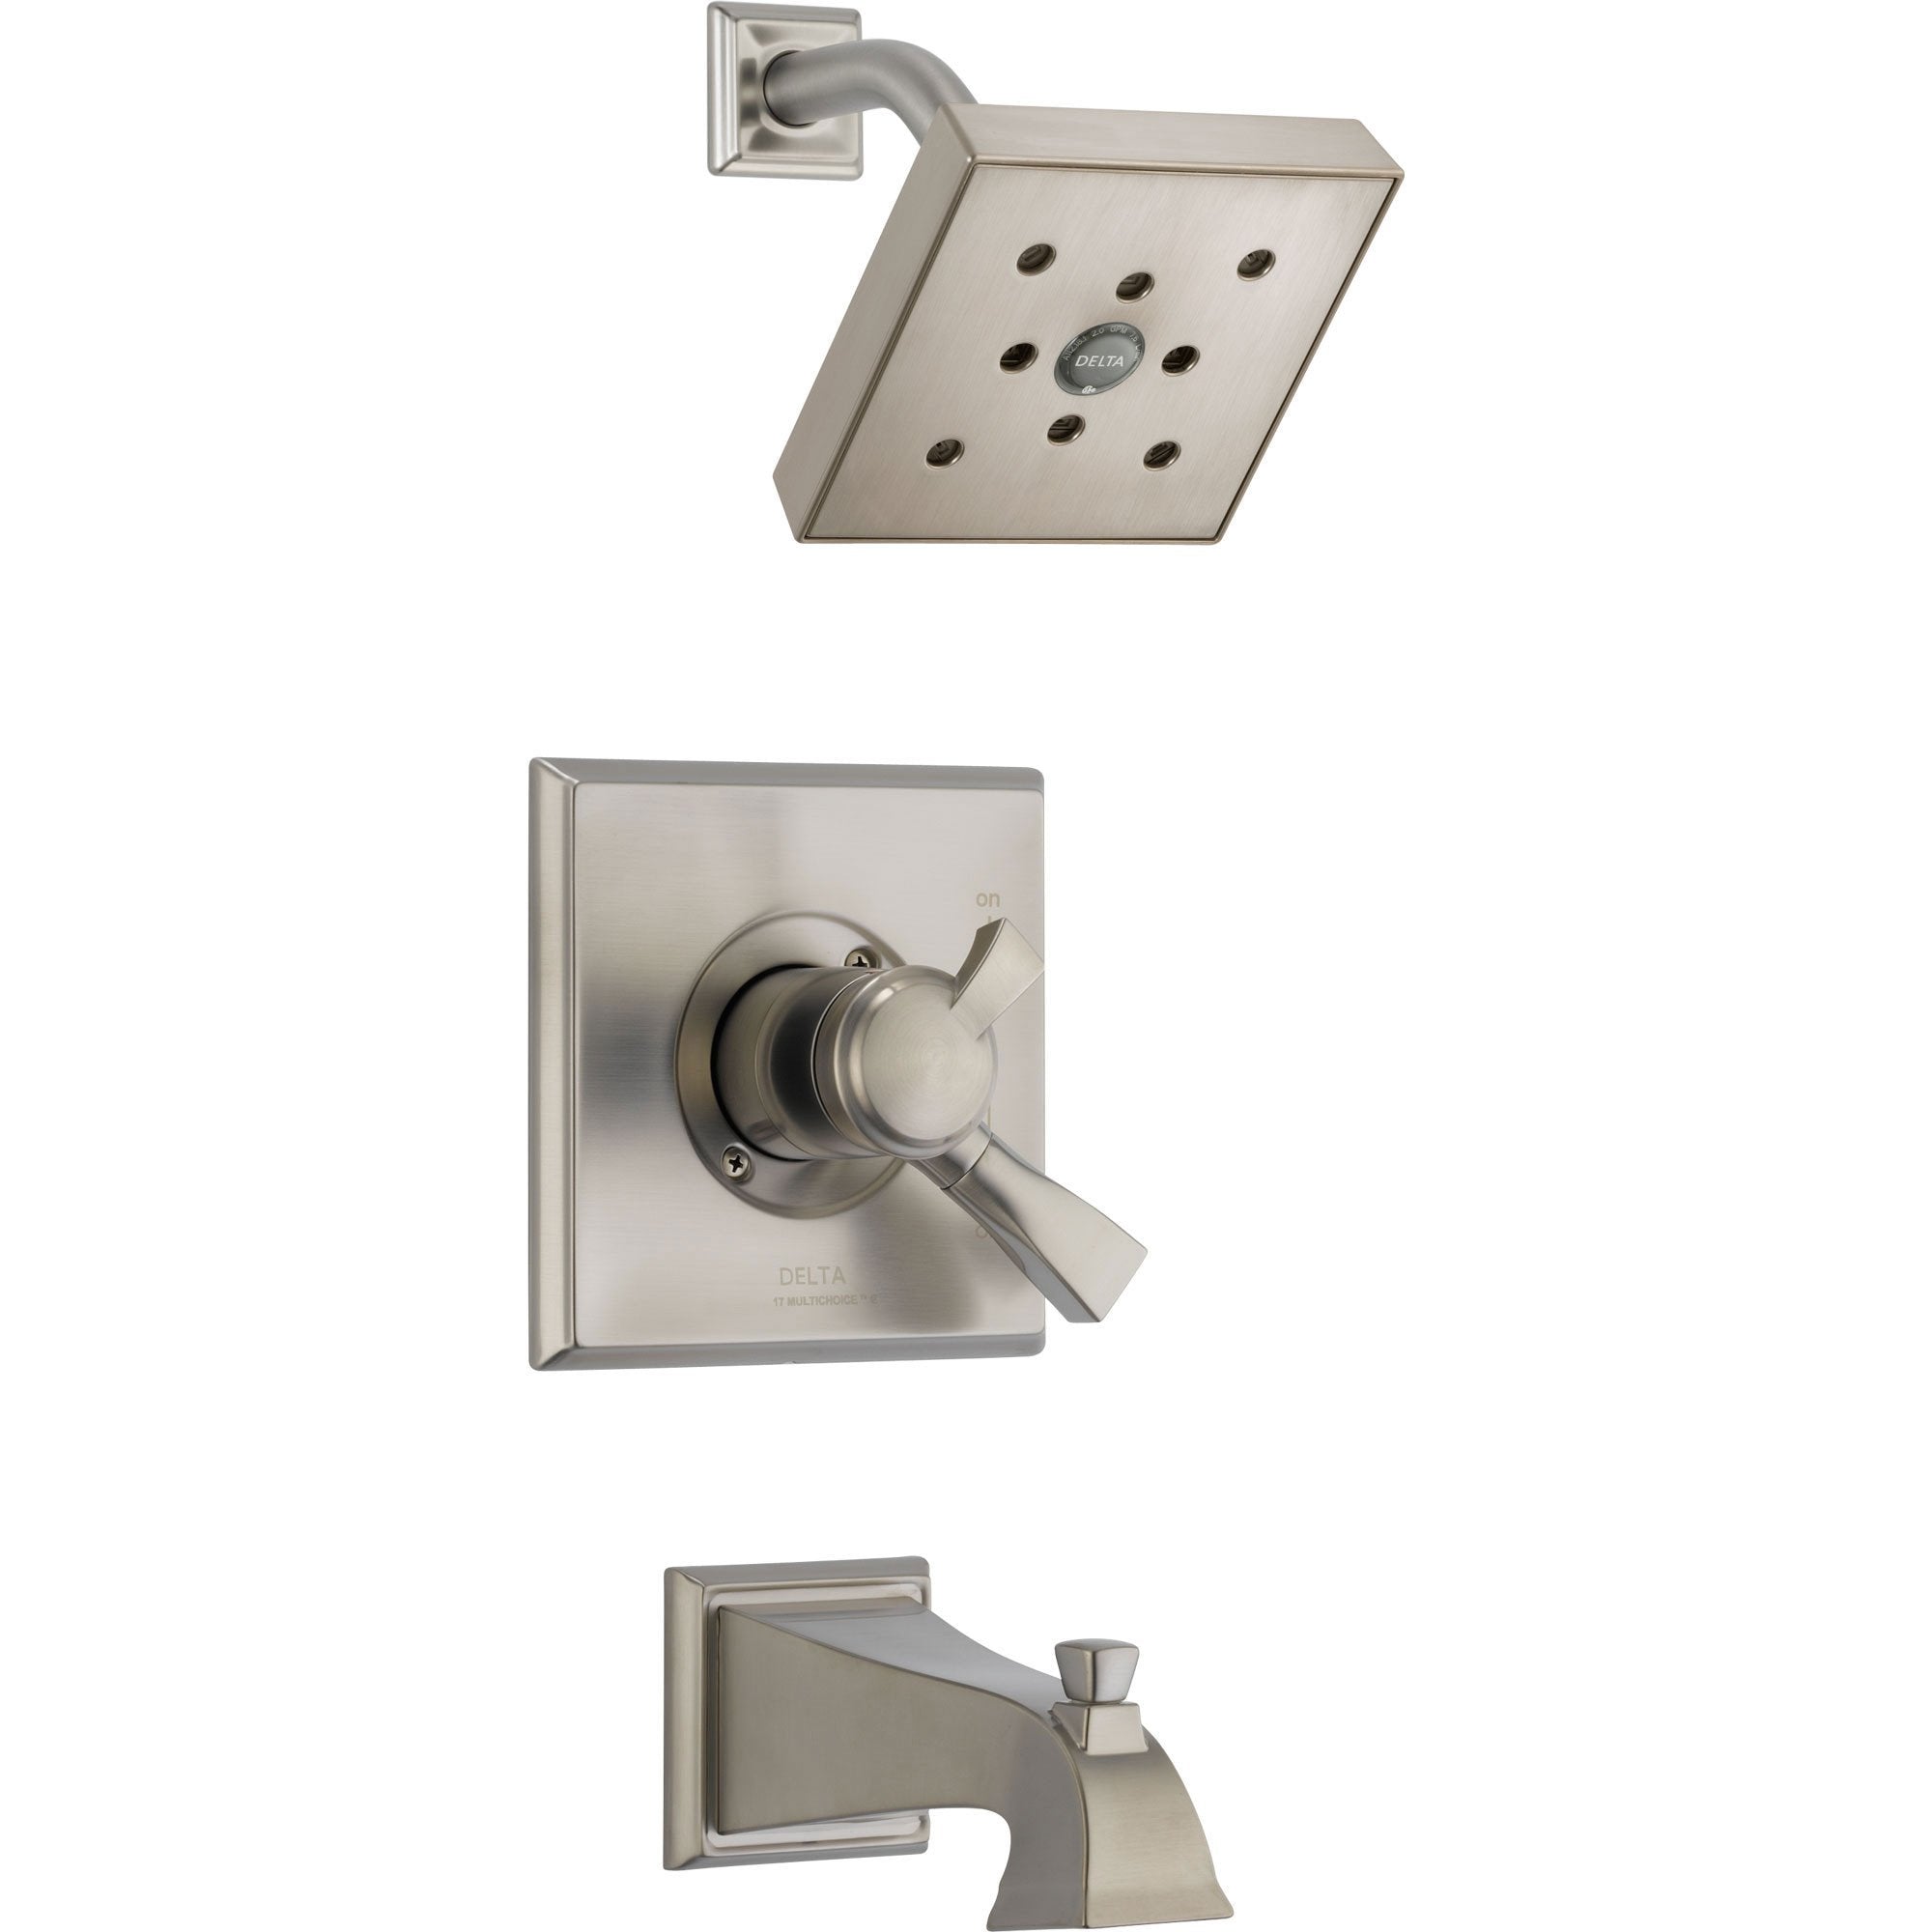 Delta Dryden Temp/Volume Tub & Shower Faucet with Valve in Stainless Steel D444V